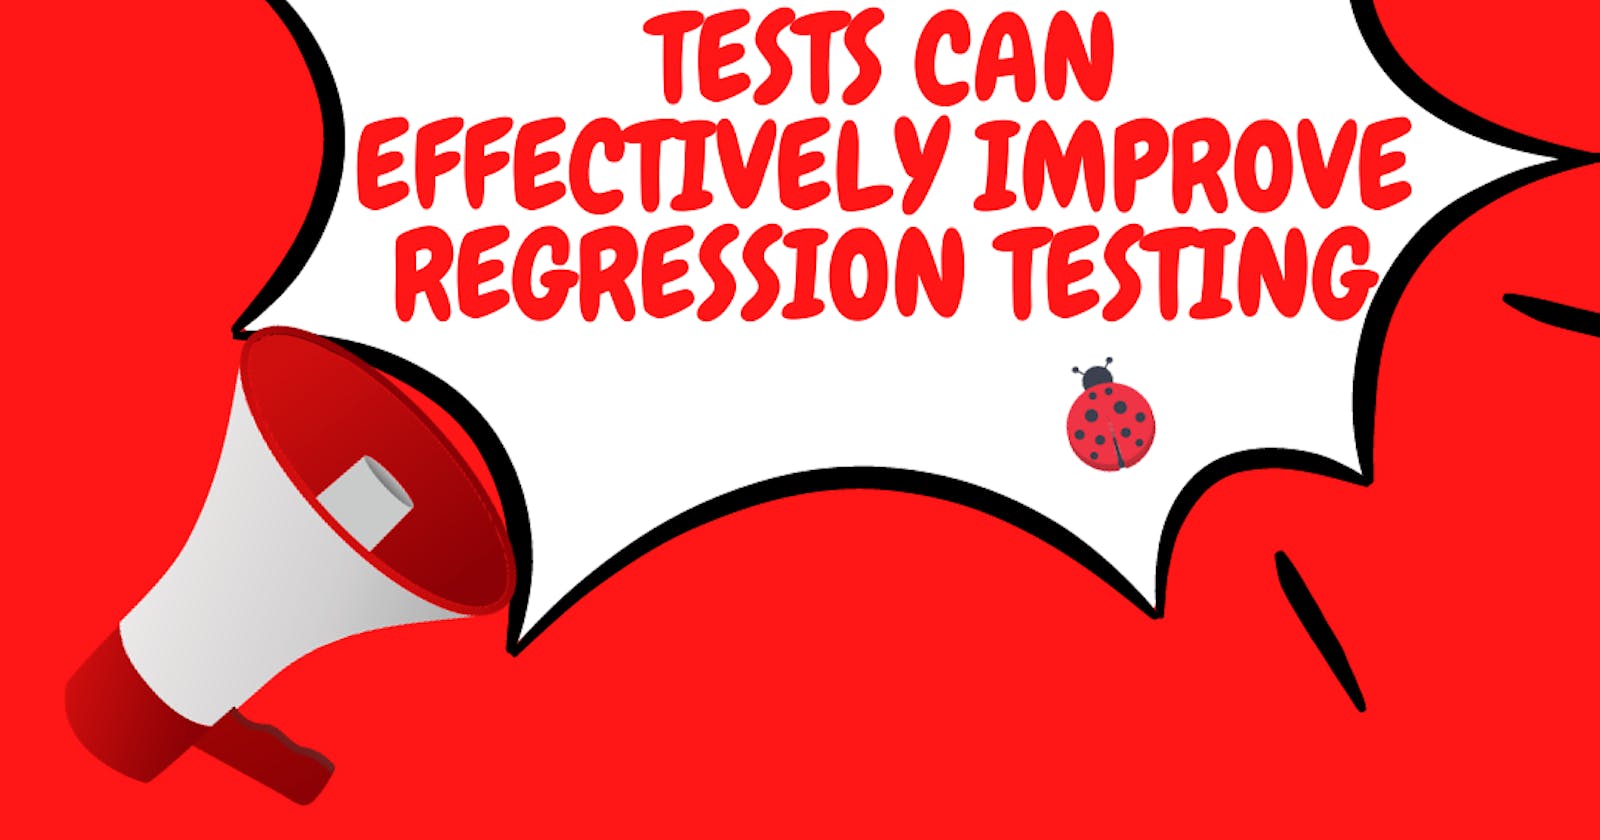 How Automation Tests Can Effectively Improve Regression Testing